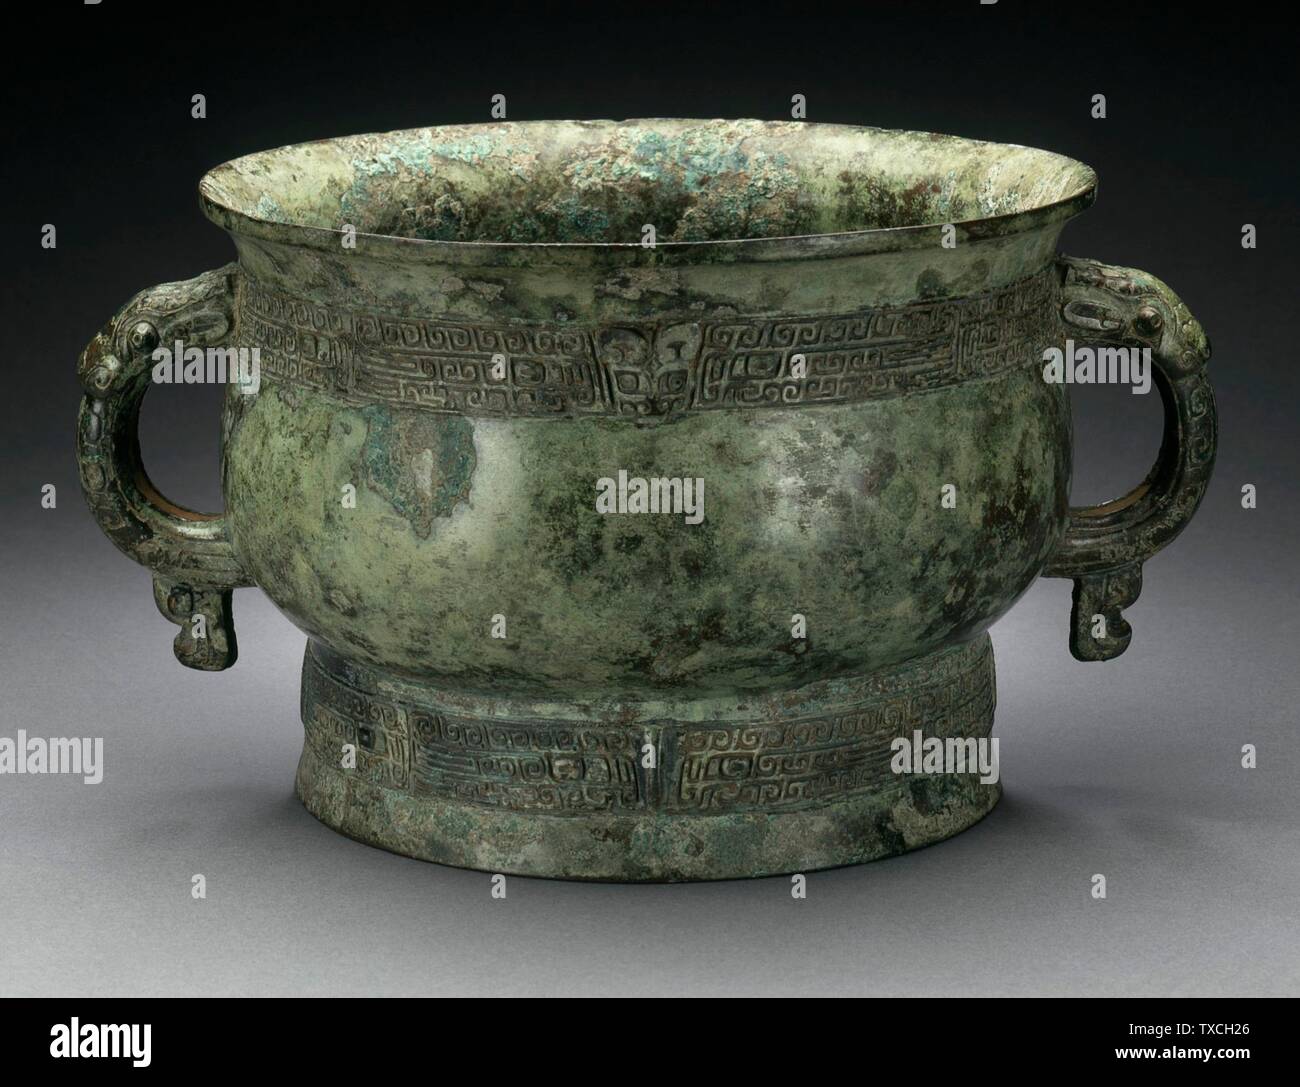 Ritual Grain Server (Gui) with Dragon Handles; China, Late Shang dynasty, late Anyang phase, or early Western Zhou dynasty, about 1100-950 B.C. Furnishings; Serviceware Cast bronze 5 1/4 x 9 5/8 x 7 7/8 in. (13.34 x 24.45 x 20 cm) The Claire Behar Bequest given in honor of George Kuwayama (M.89.136.7) Chinese Art; between circa 1100 and circa 950 B.C.; Stock Photo